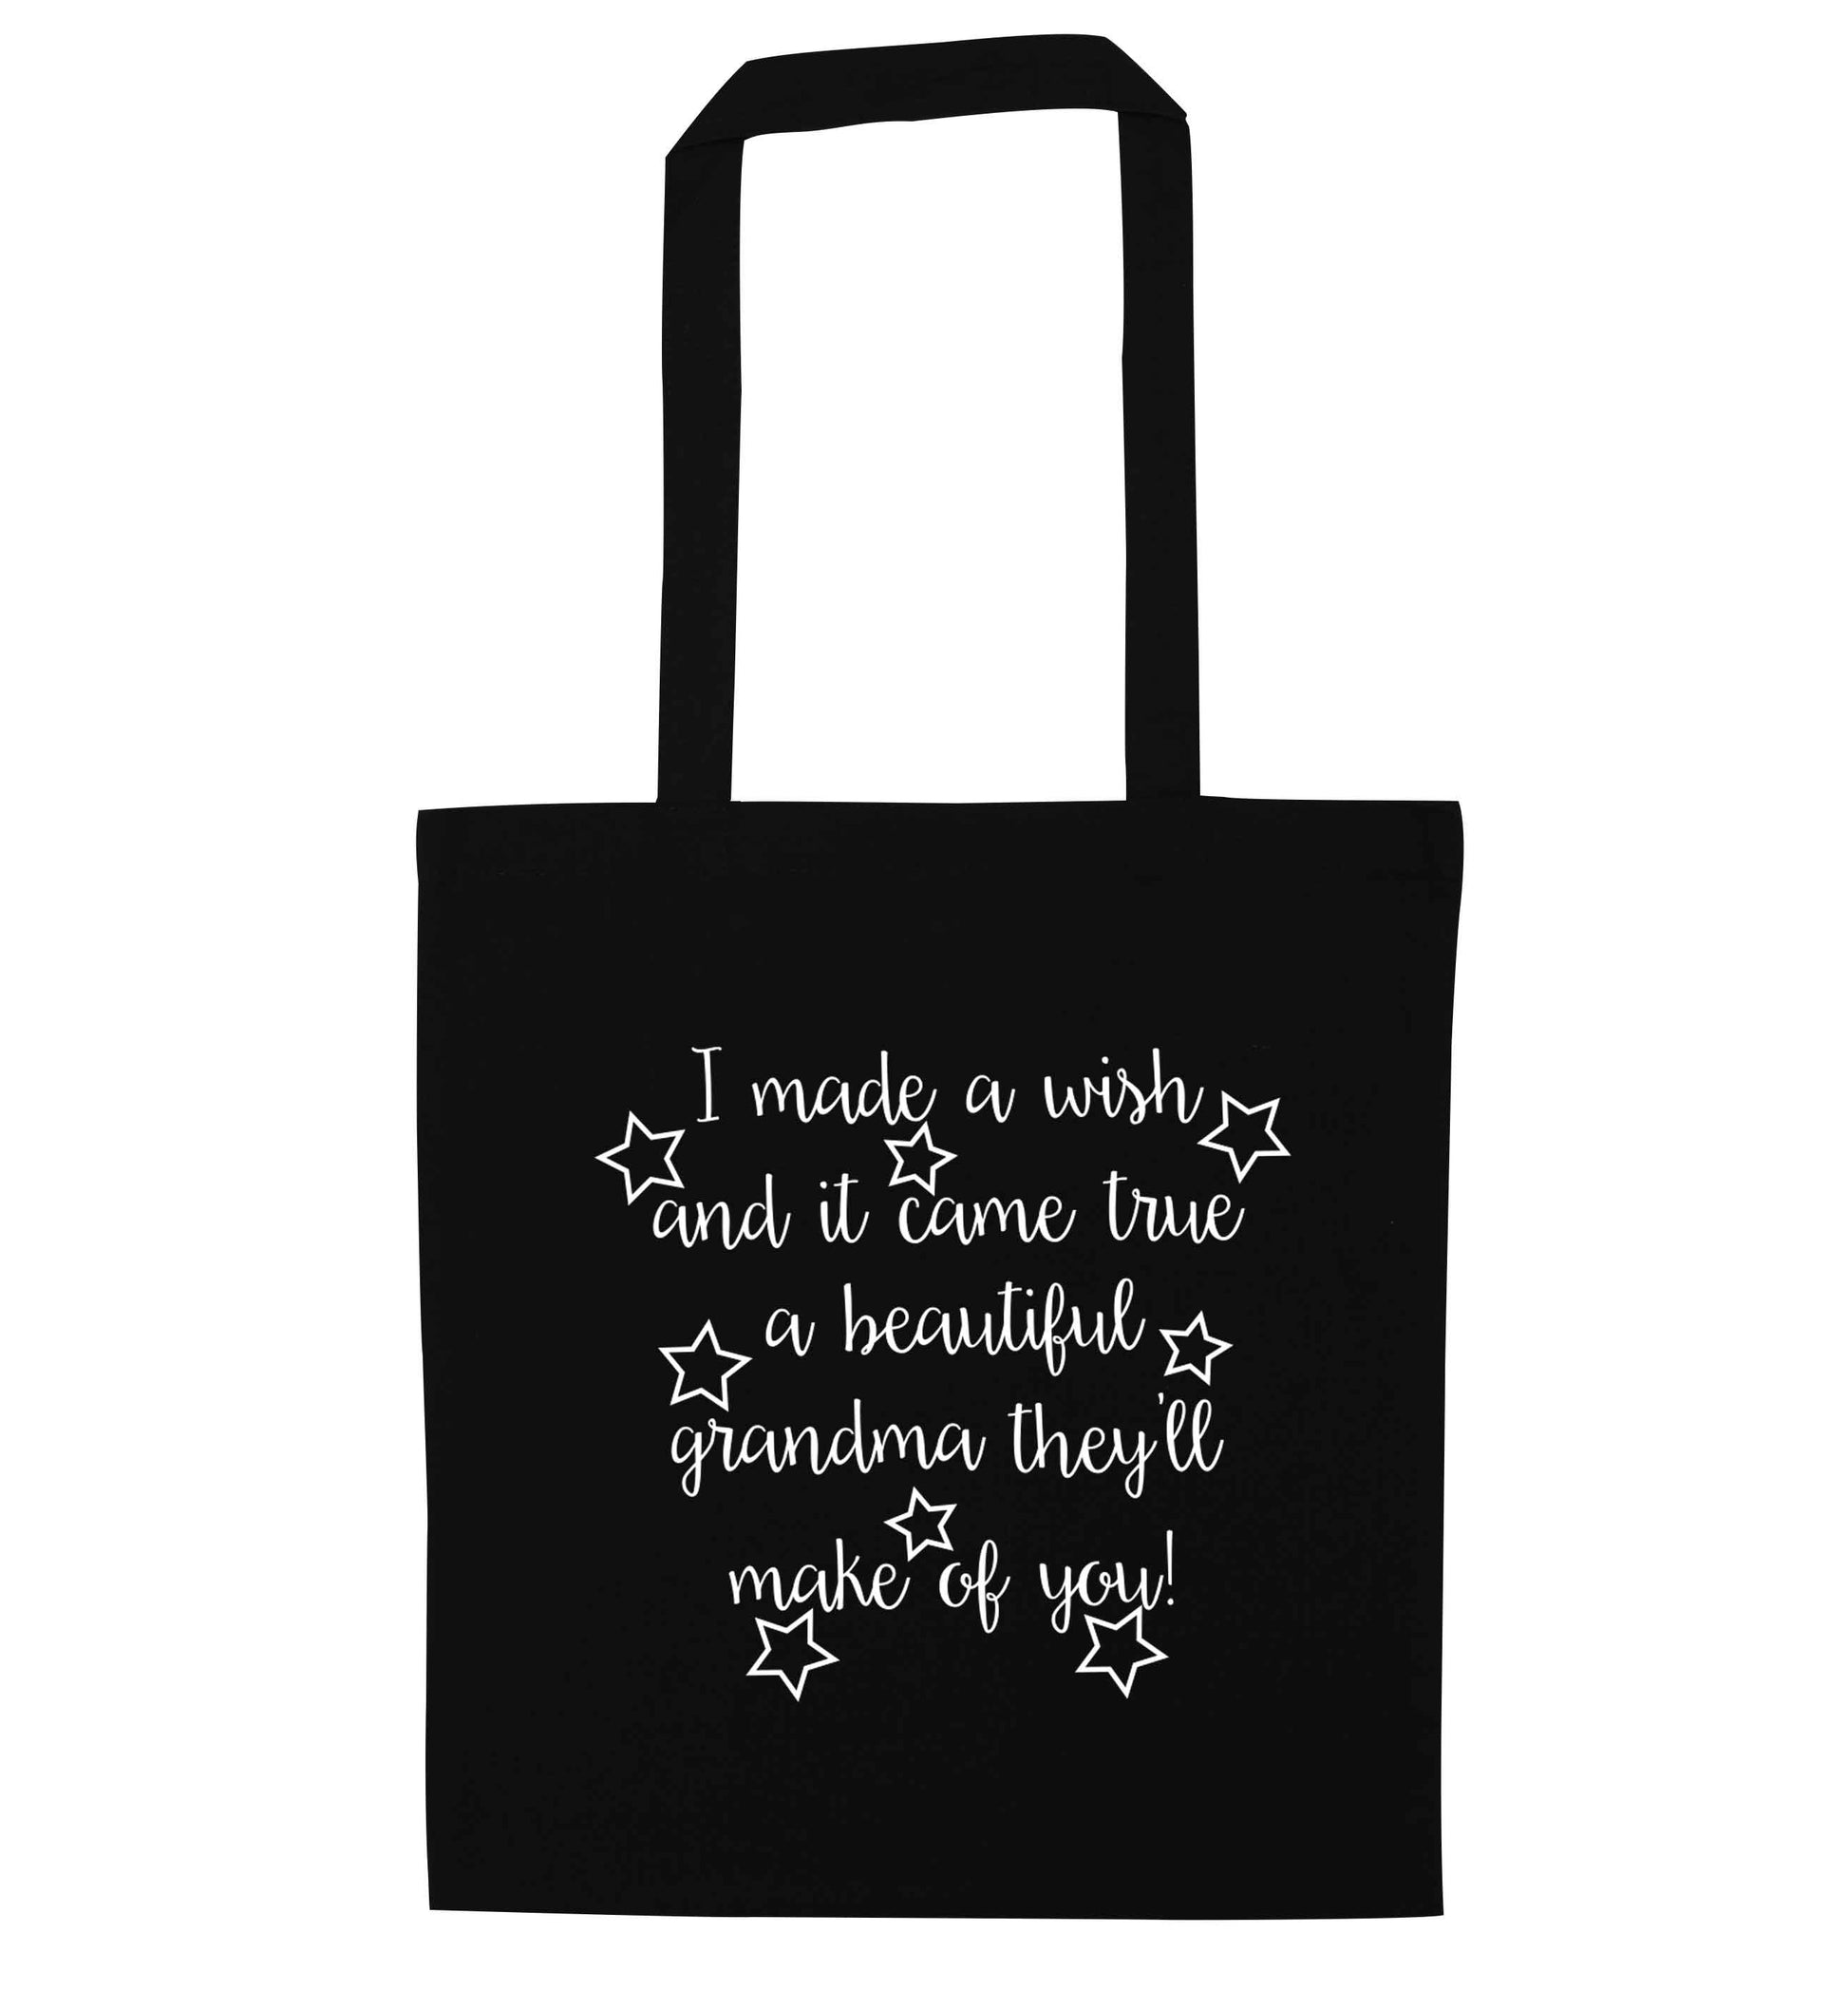 I made a wish and it came true a beautiful grandma they'll make of you! black tote bag